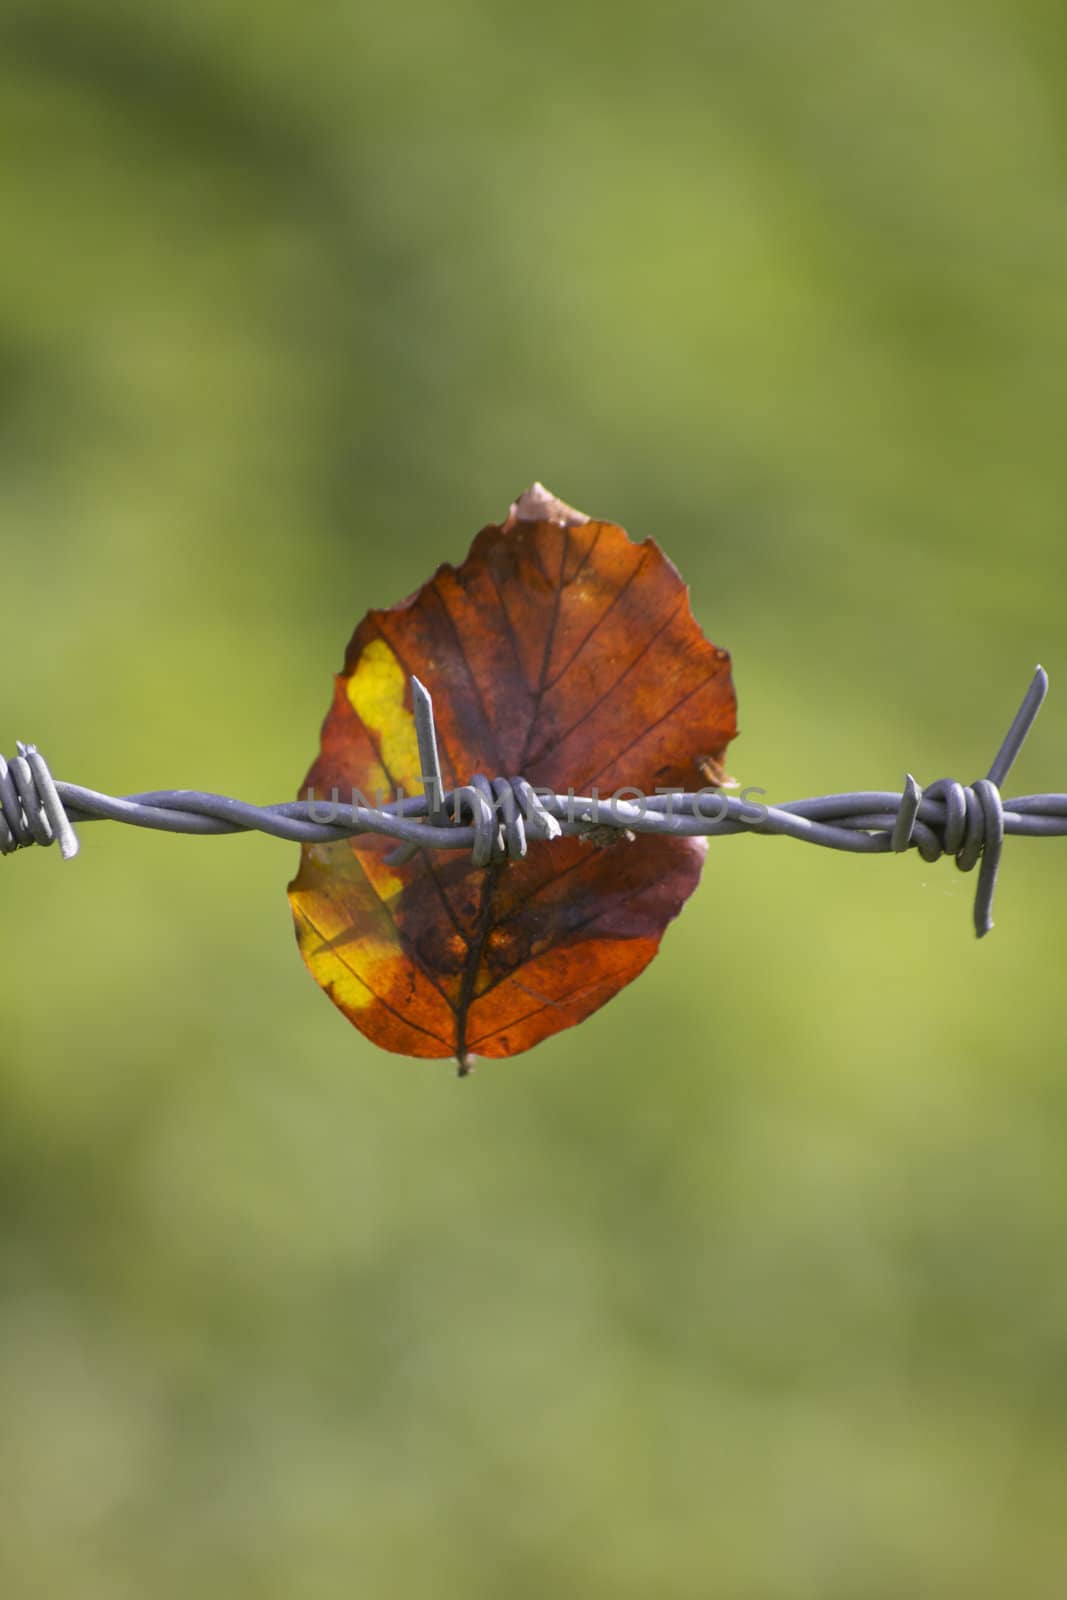 Barbed Wire and Leaf by naffarts2